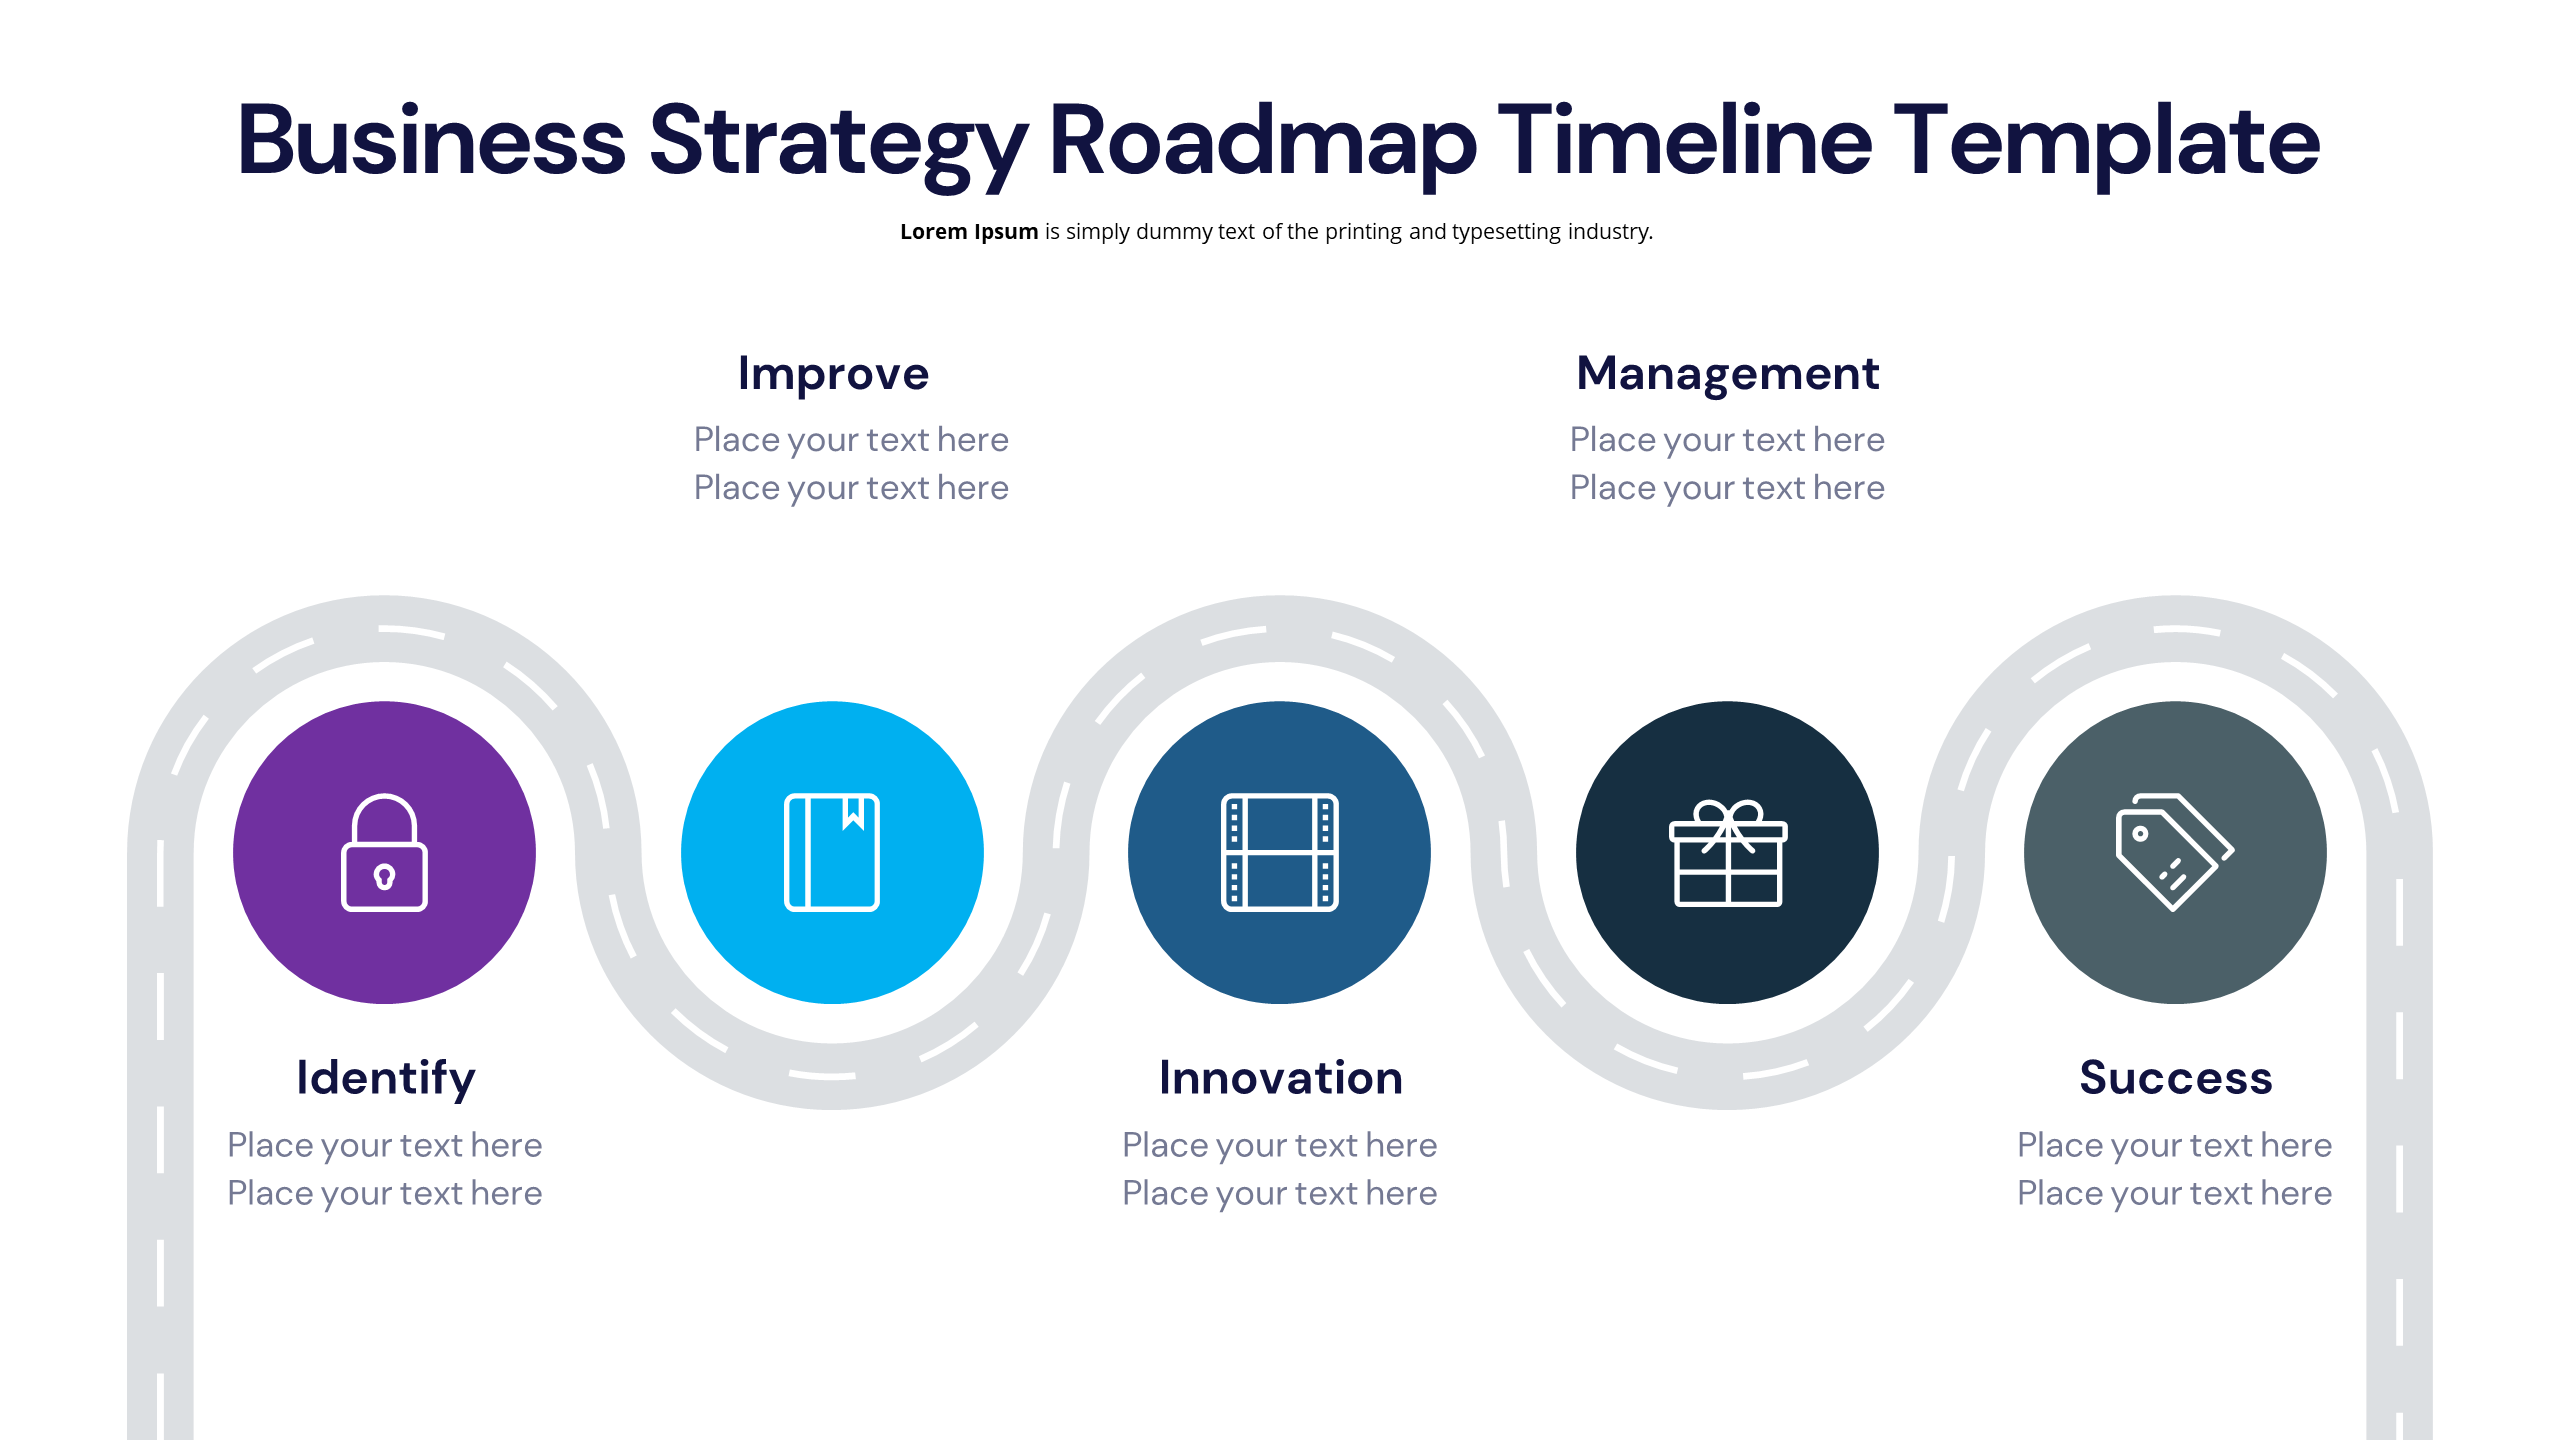 Business Strategy Roadmap Timeline Template